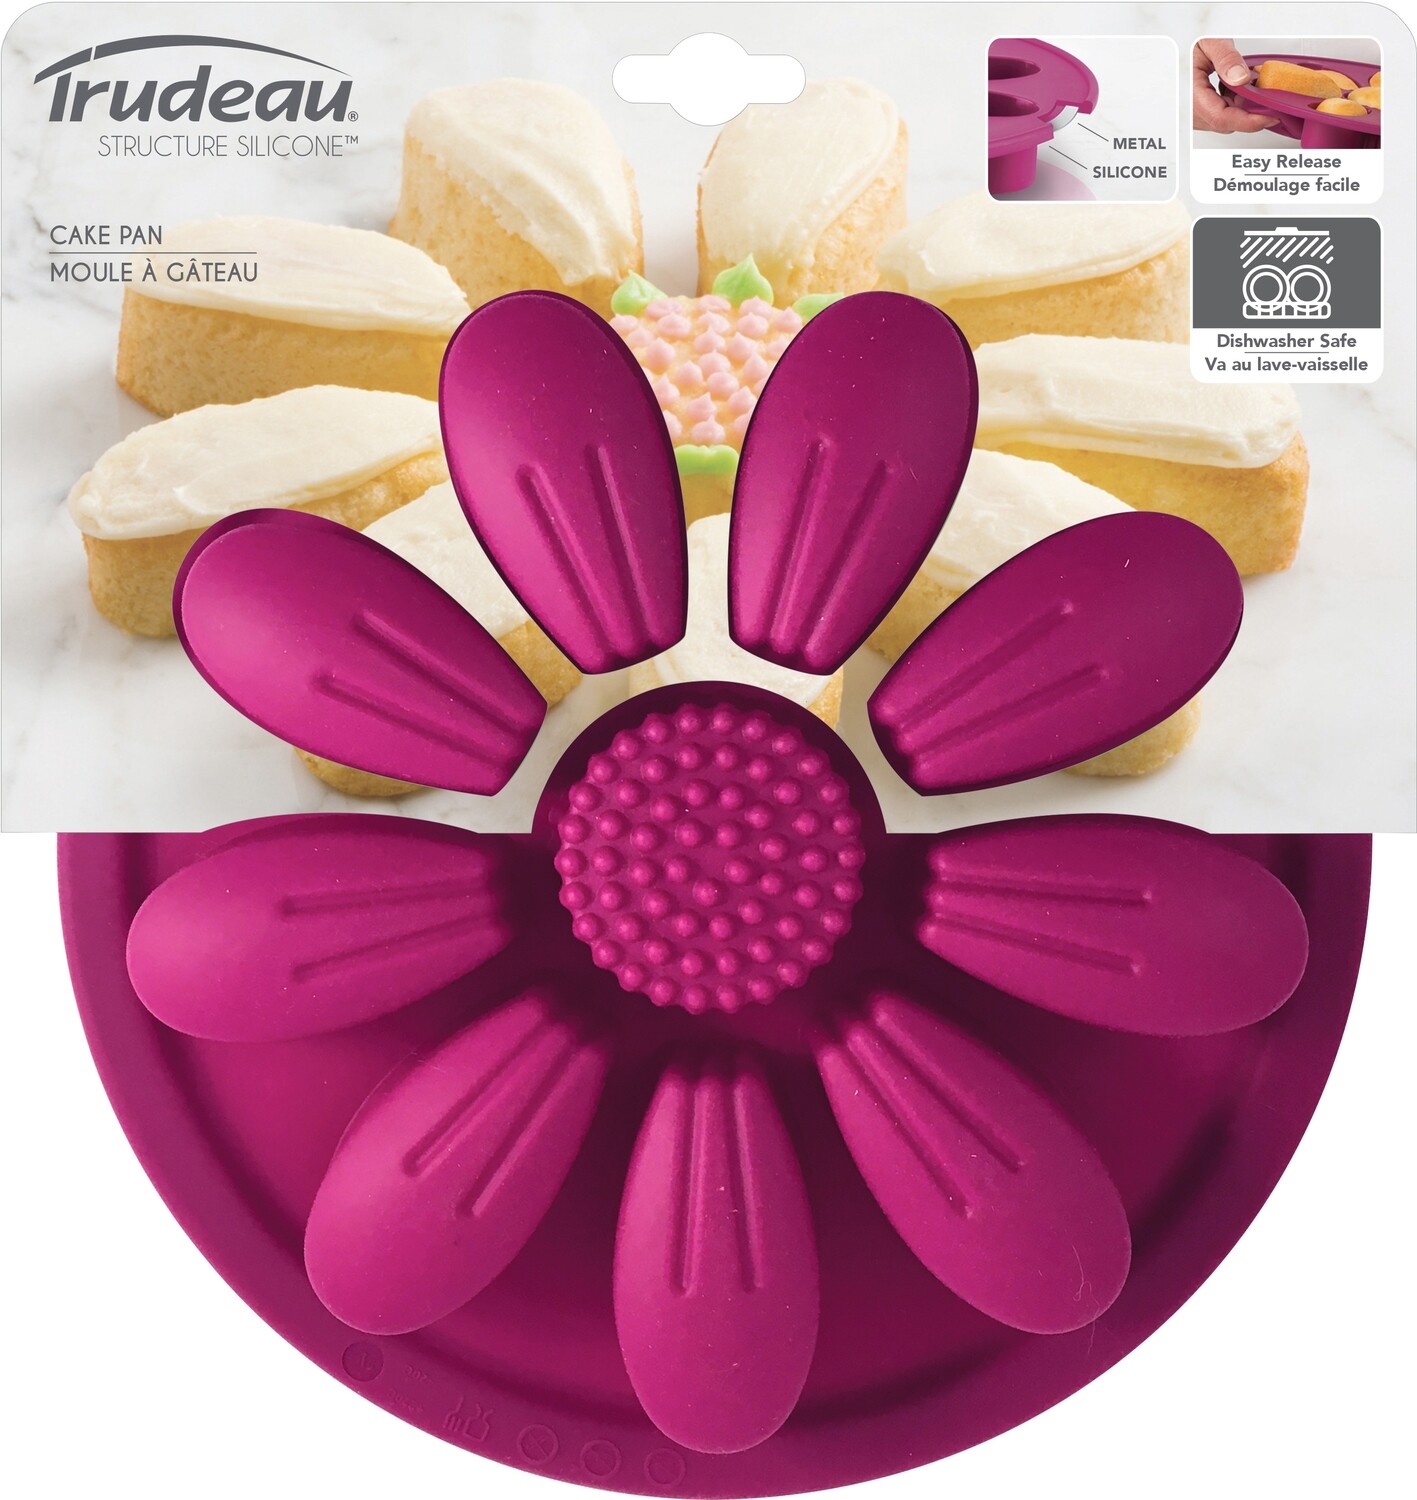 Trudeau Structure Cake Pan Silicone w/Daisy Flower Pattern